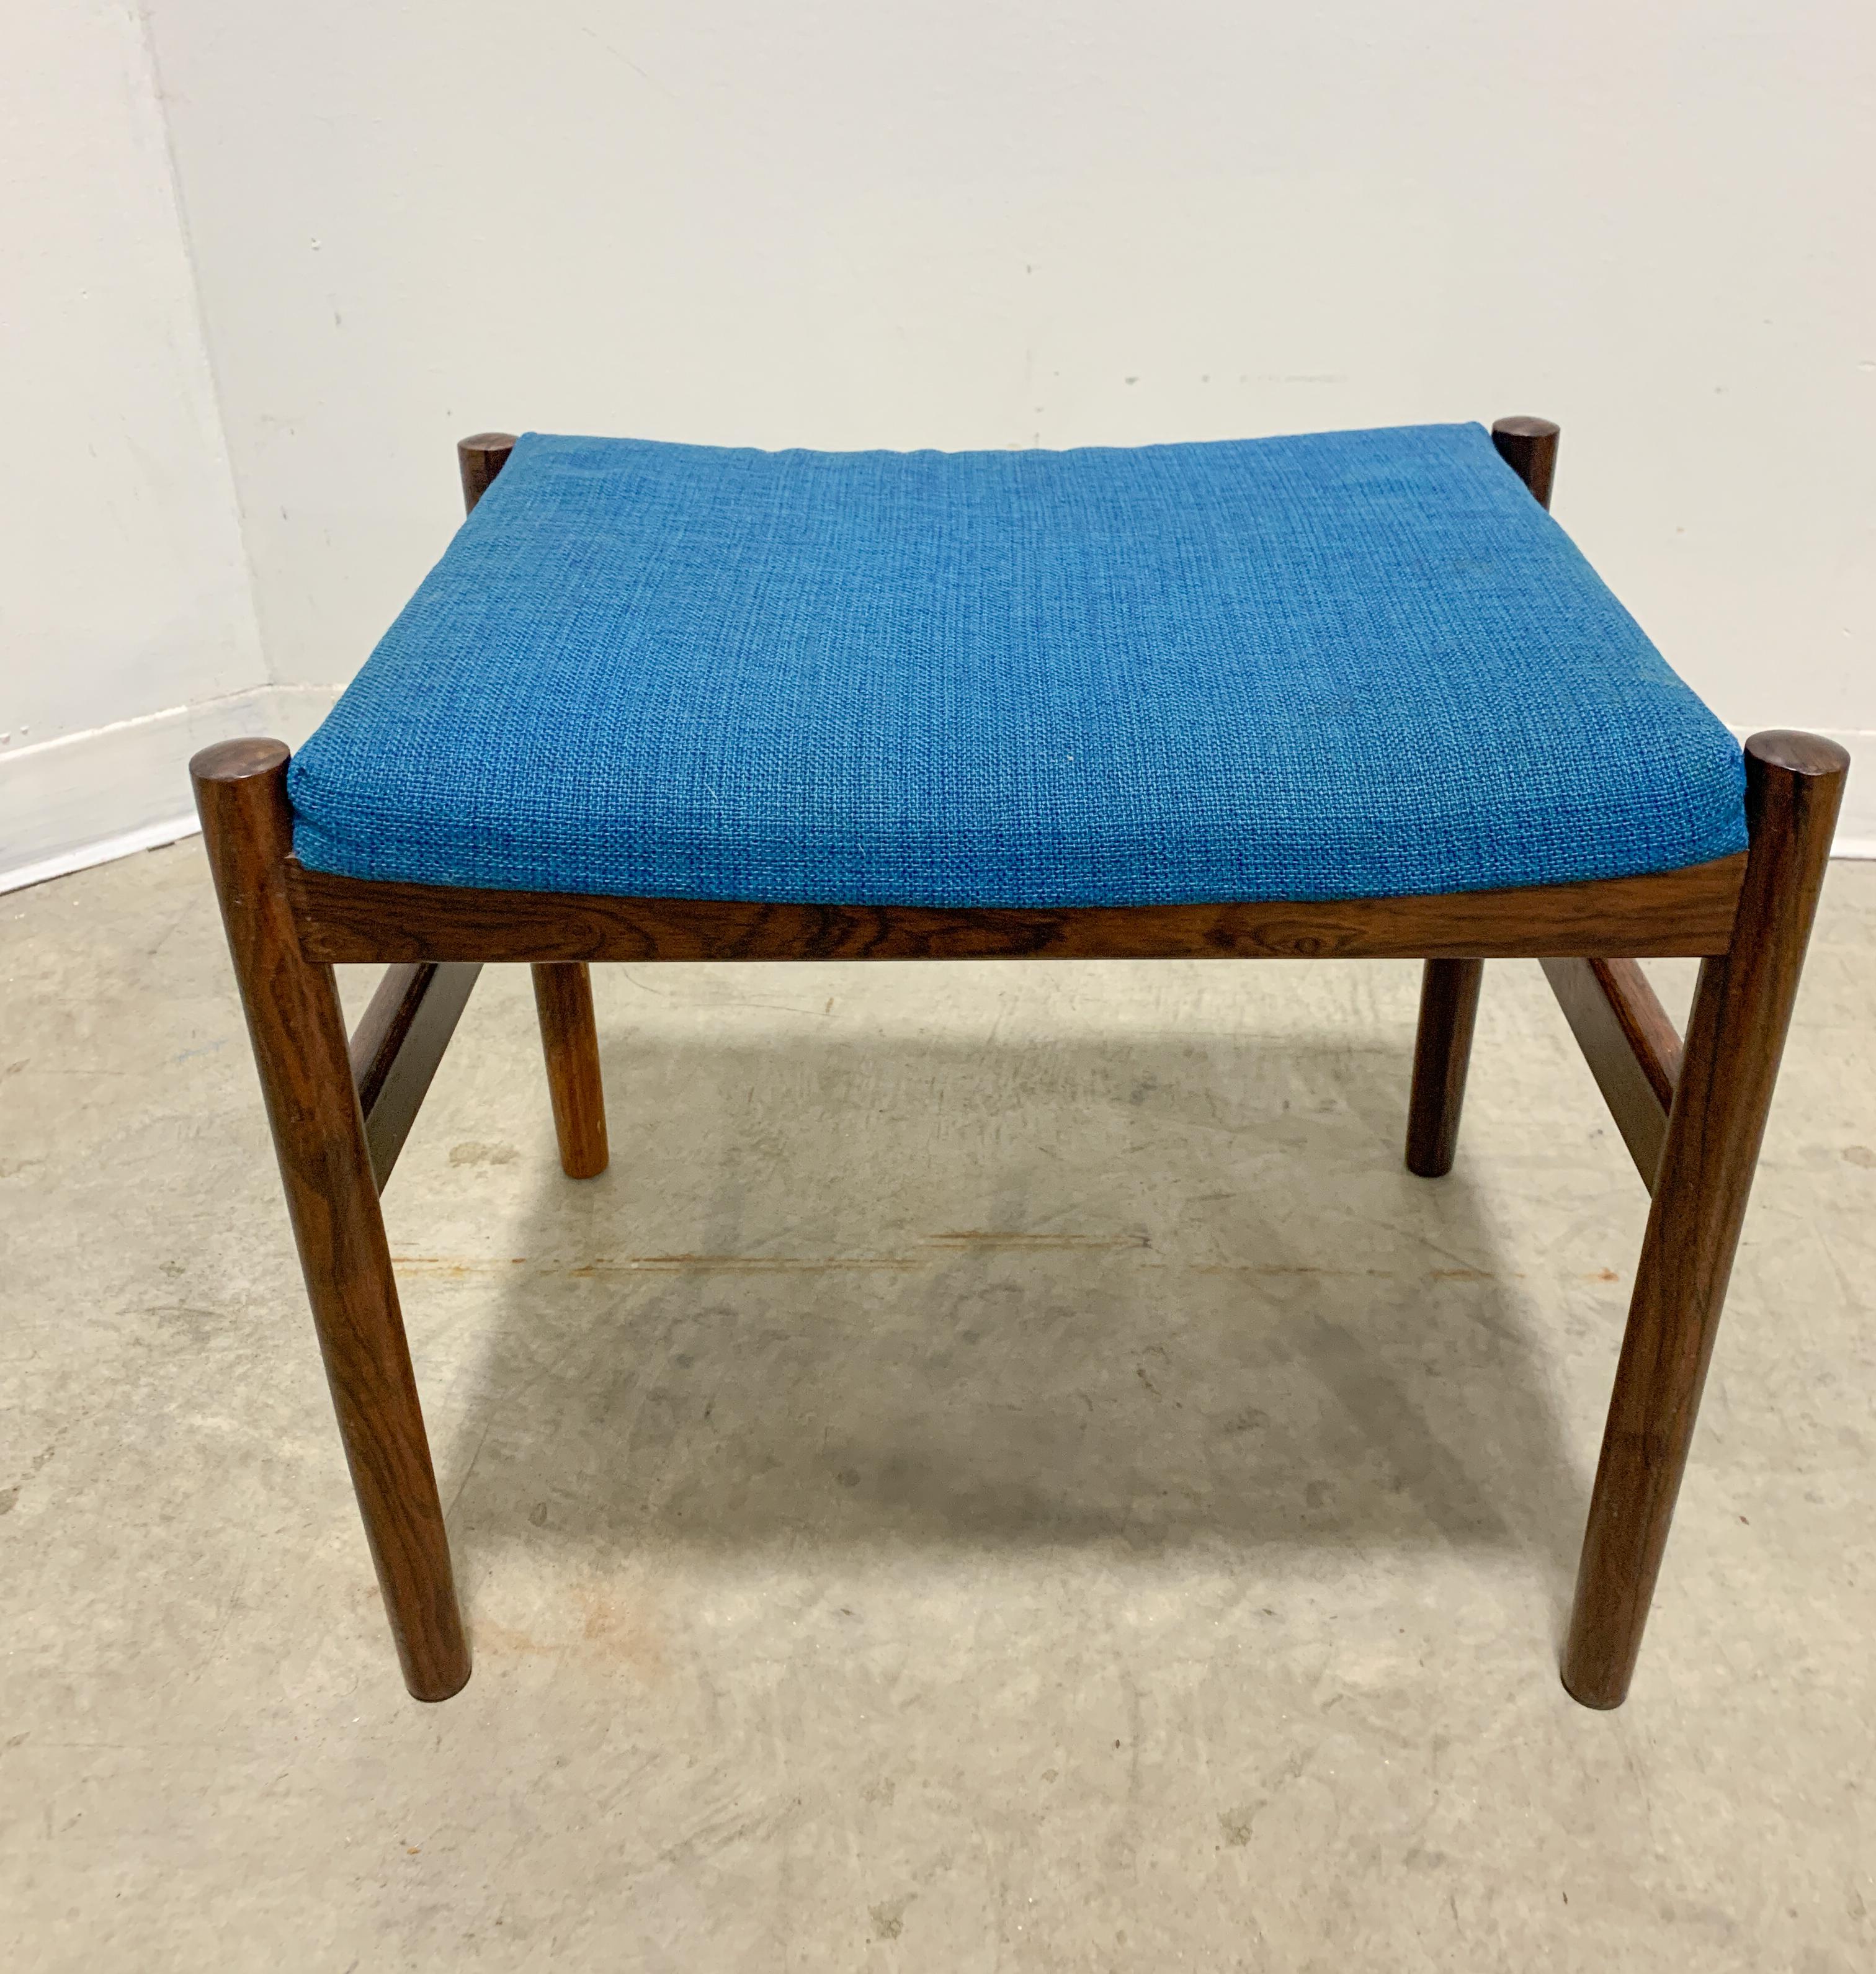 Beautiful Danish stool in Brazilian Rosewood made by Spottrup. Elegant frame of solid rosewood with striking blue original upholstery in good condition. Foam is still soft and comfortable as a footstool or vanity stool.
 
Measures: 21